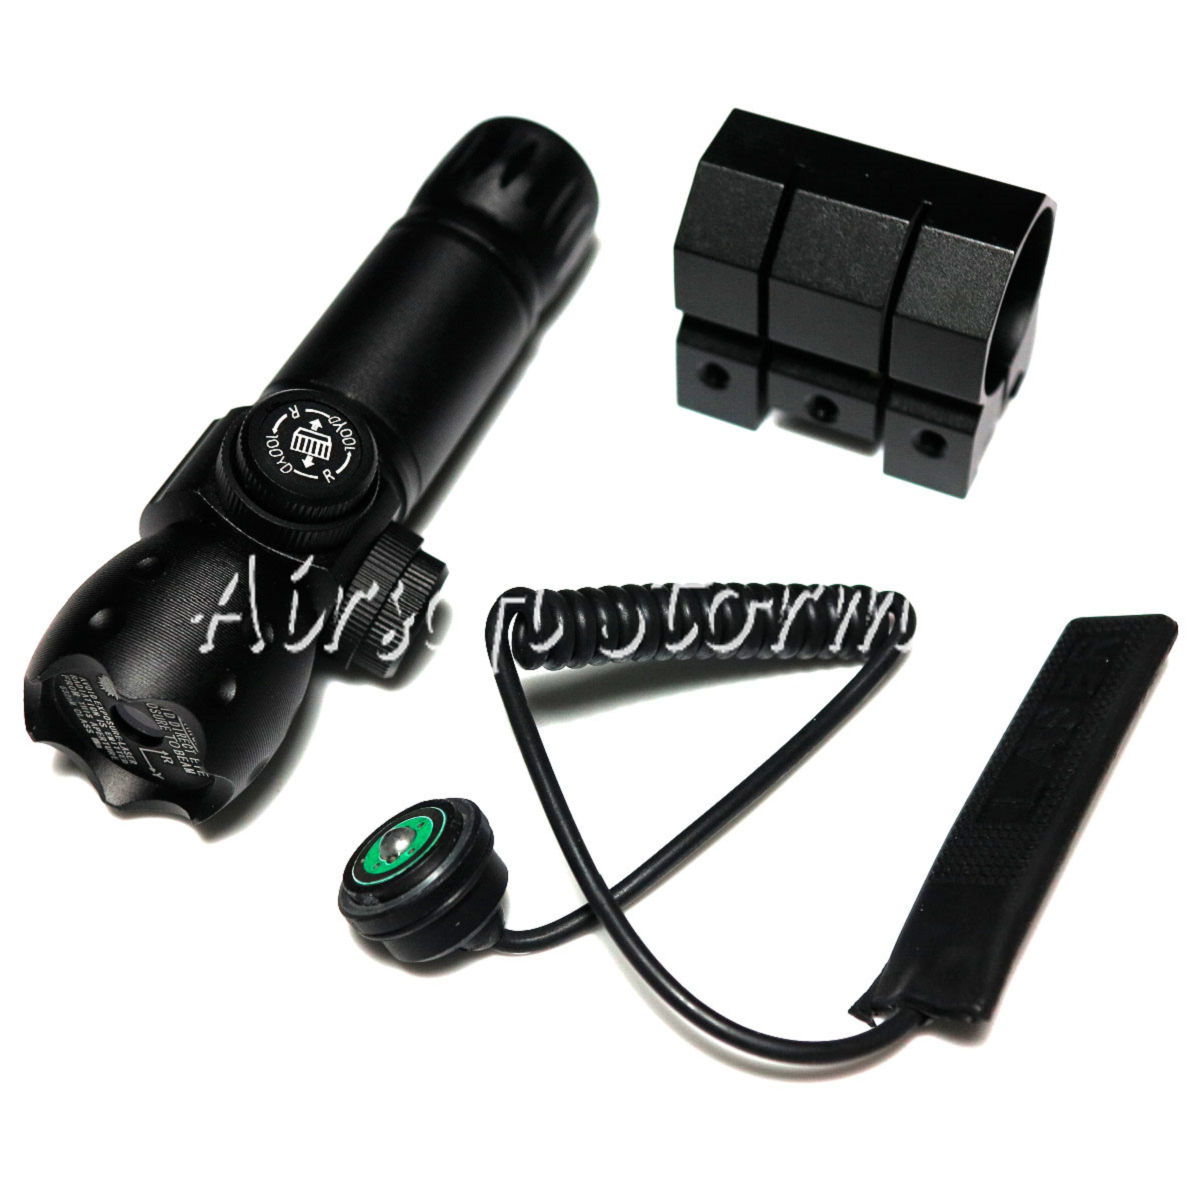 LXGD Tactical Gear Rifle AEG Green Laser Tactical Head Sight Pointer JG-020 - Click Image to Close